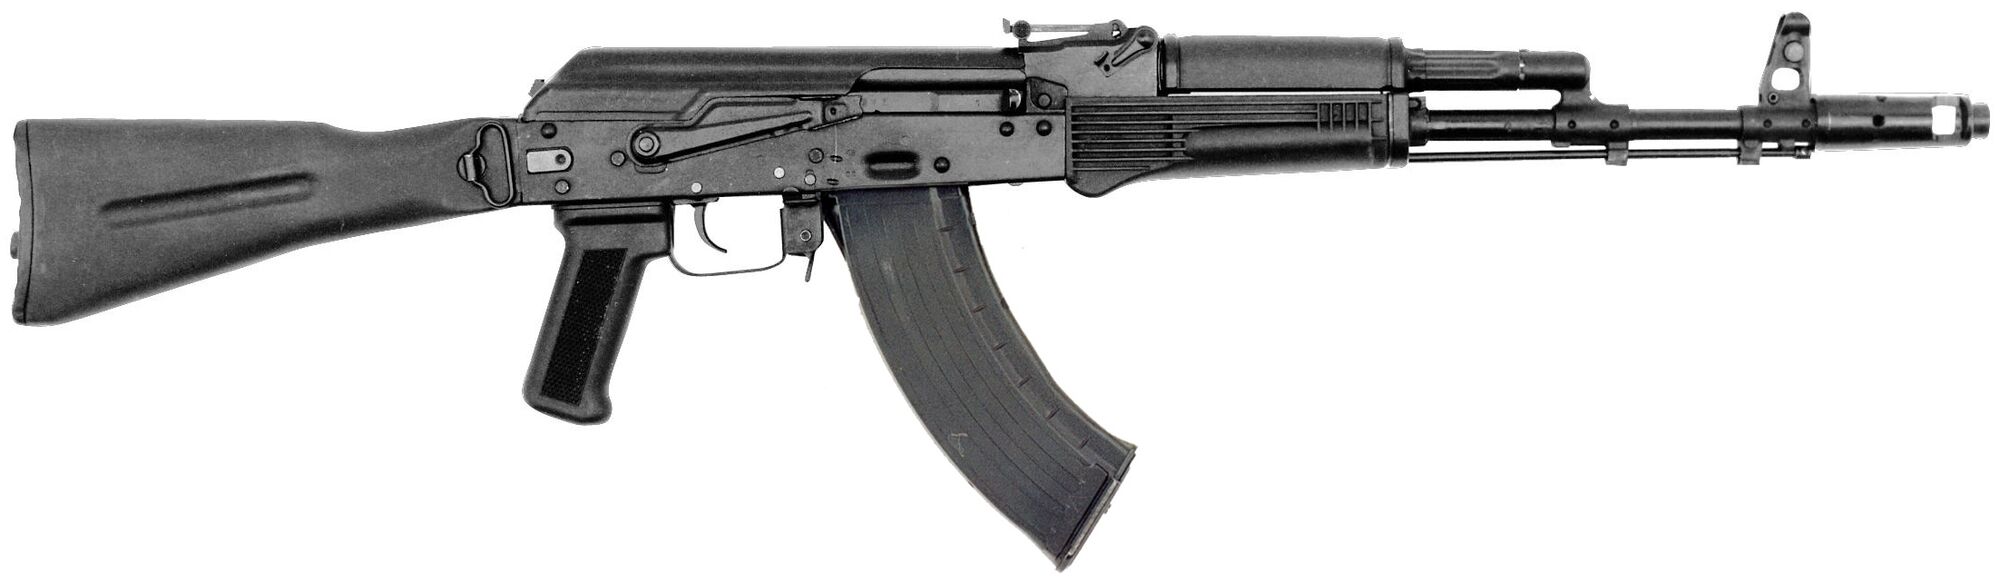 The AK-103, spitting image of mine